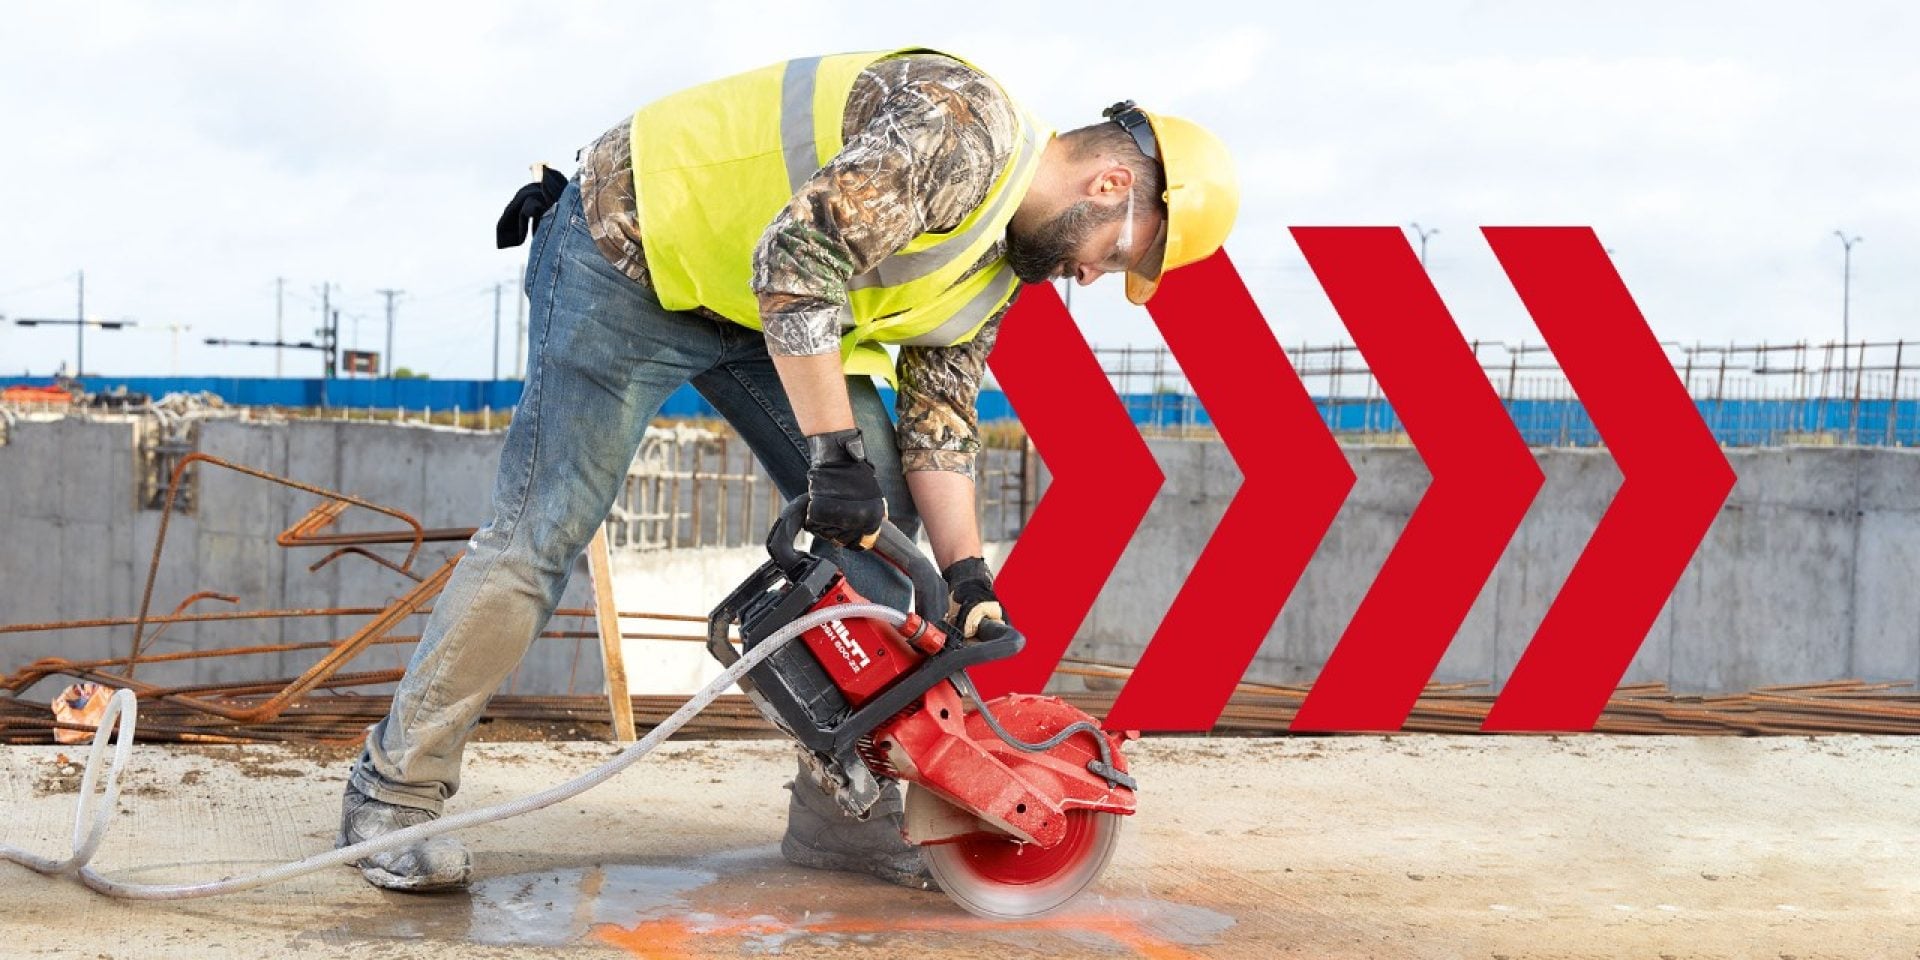 A worker cuts concrete with the Hilti Nuron DSH 600-22 battery-powered angle grinder.